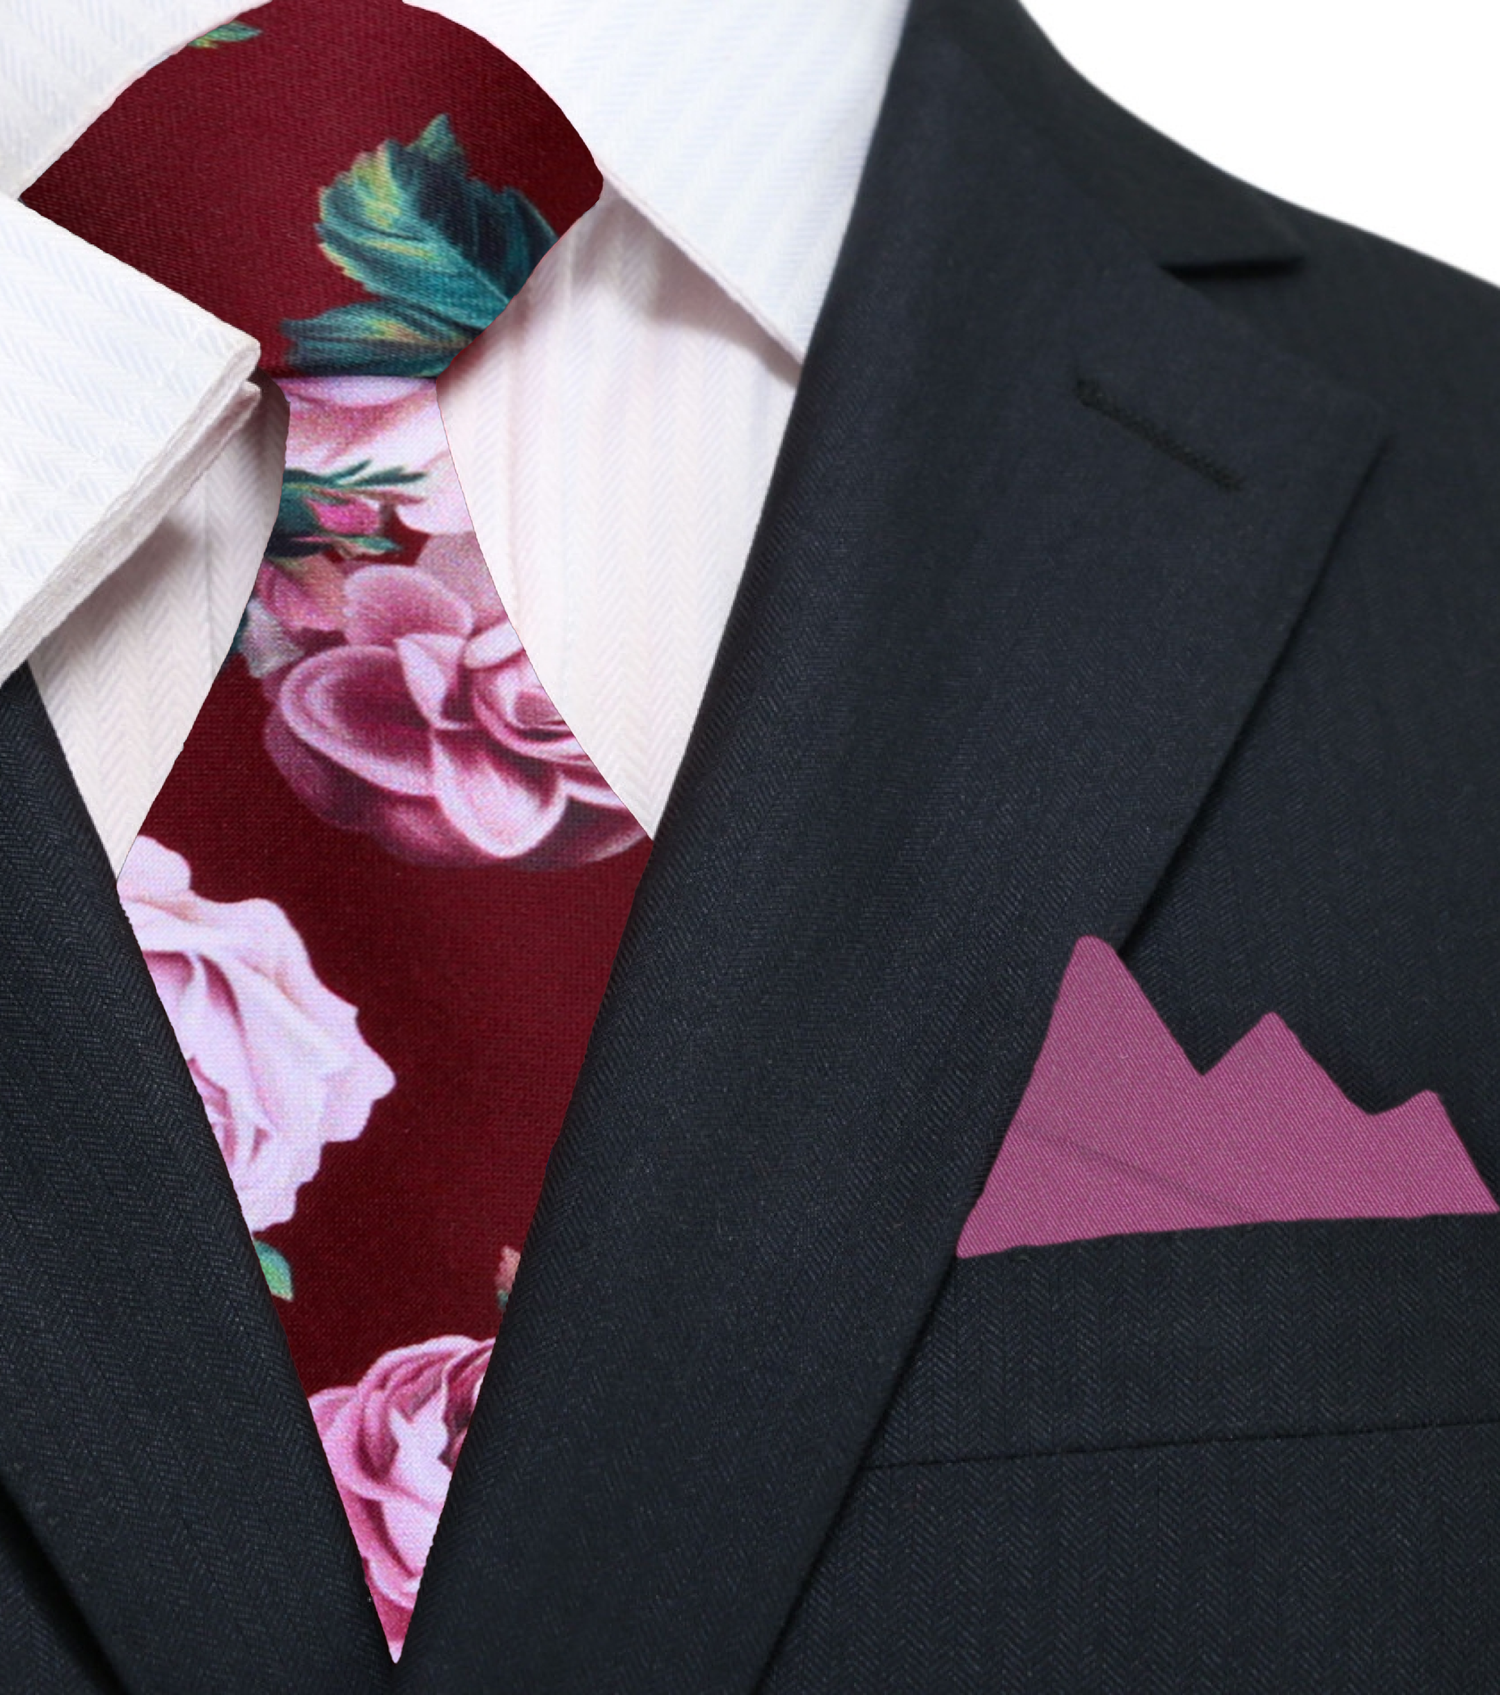 Deep Red Wine Vase of Flowers Tie and Accenting PocketSquare12